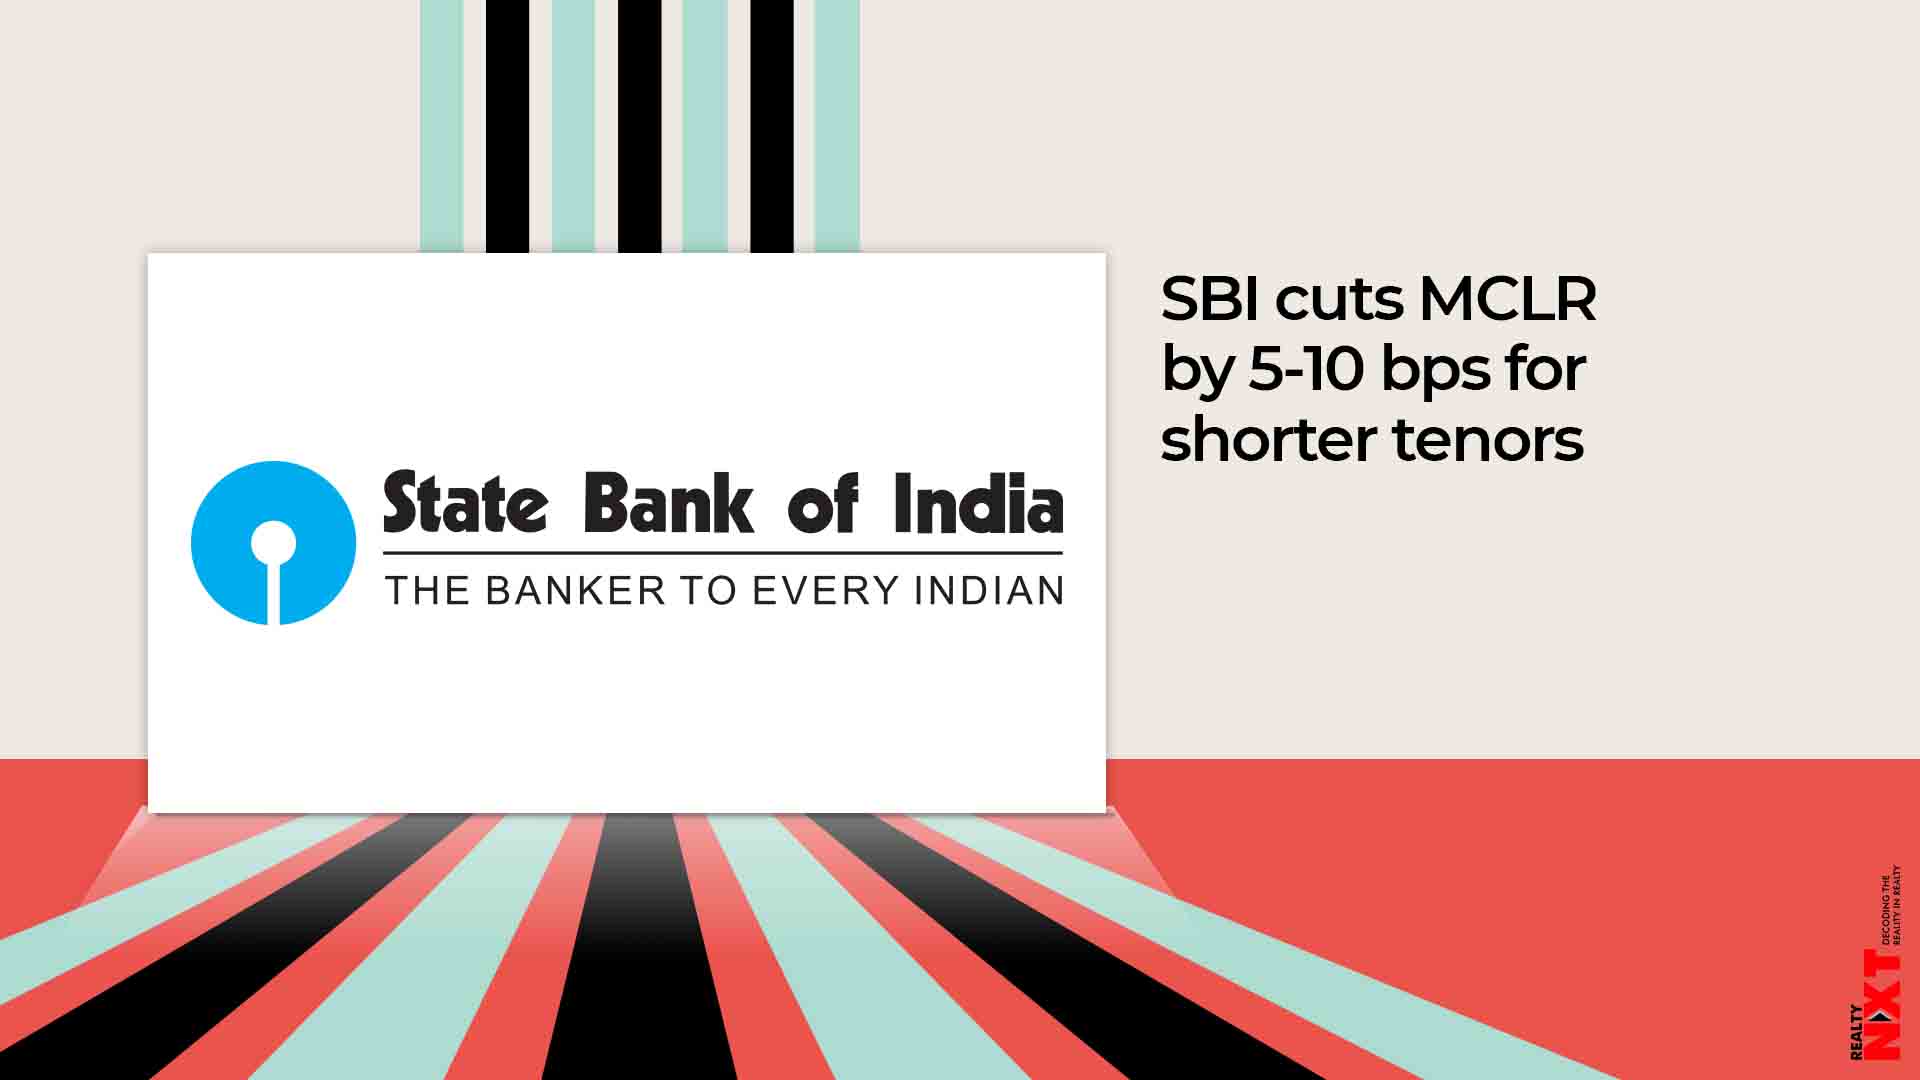 Sbi Reduced Mclr By 5 10 Bps For Shorter Tenors Realtynxt 0496